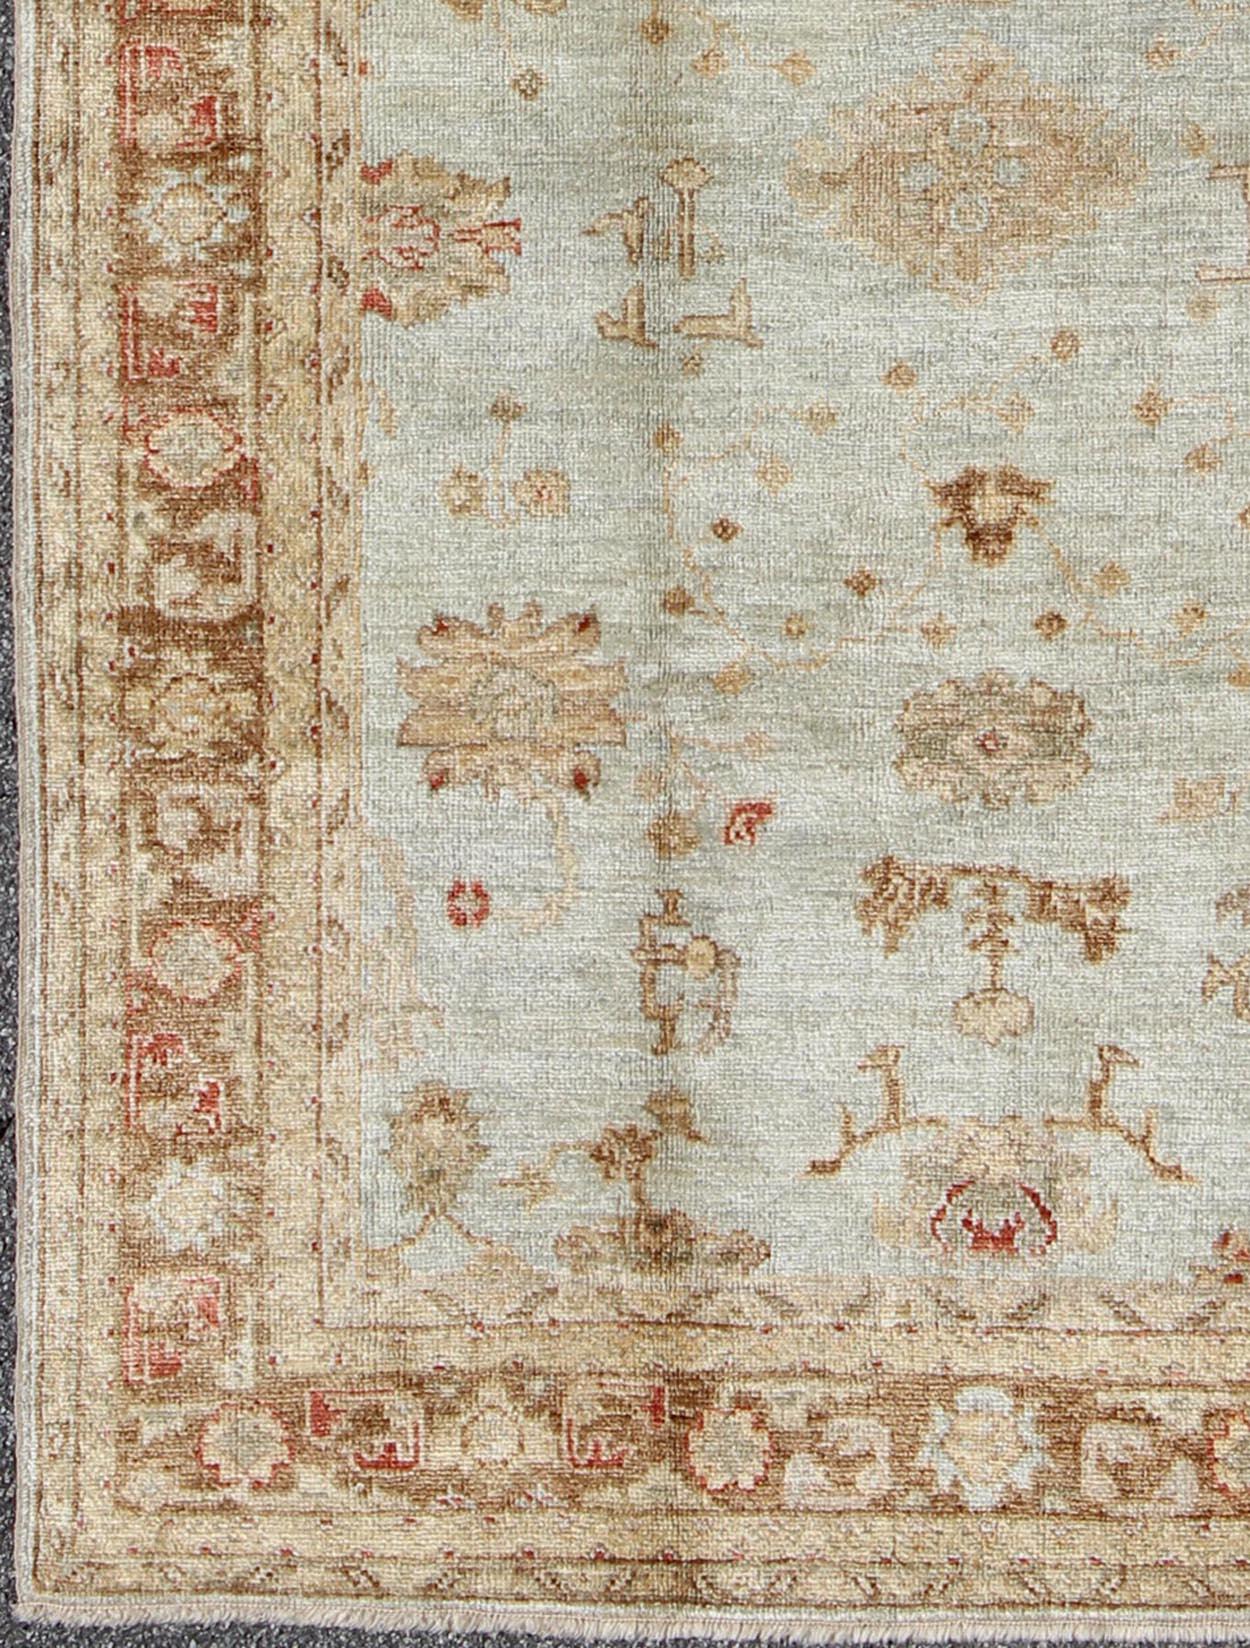 From our Angora collection, this piece is made with a combination of angora and old wool. Featuring all organic materials, the Angora collection is a modern-day remake of antique Turkish Oushak carpets from past centuries. Angora Collection rugs are